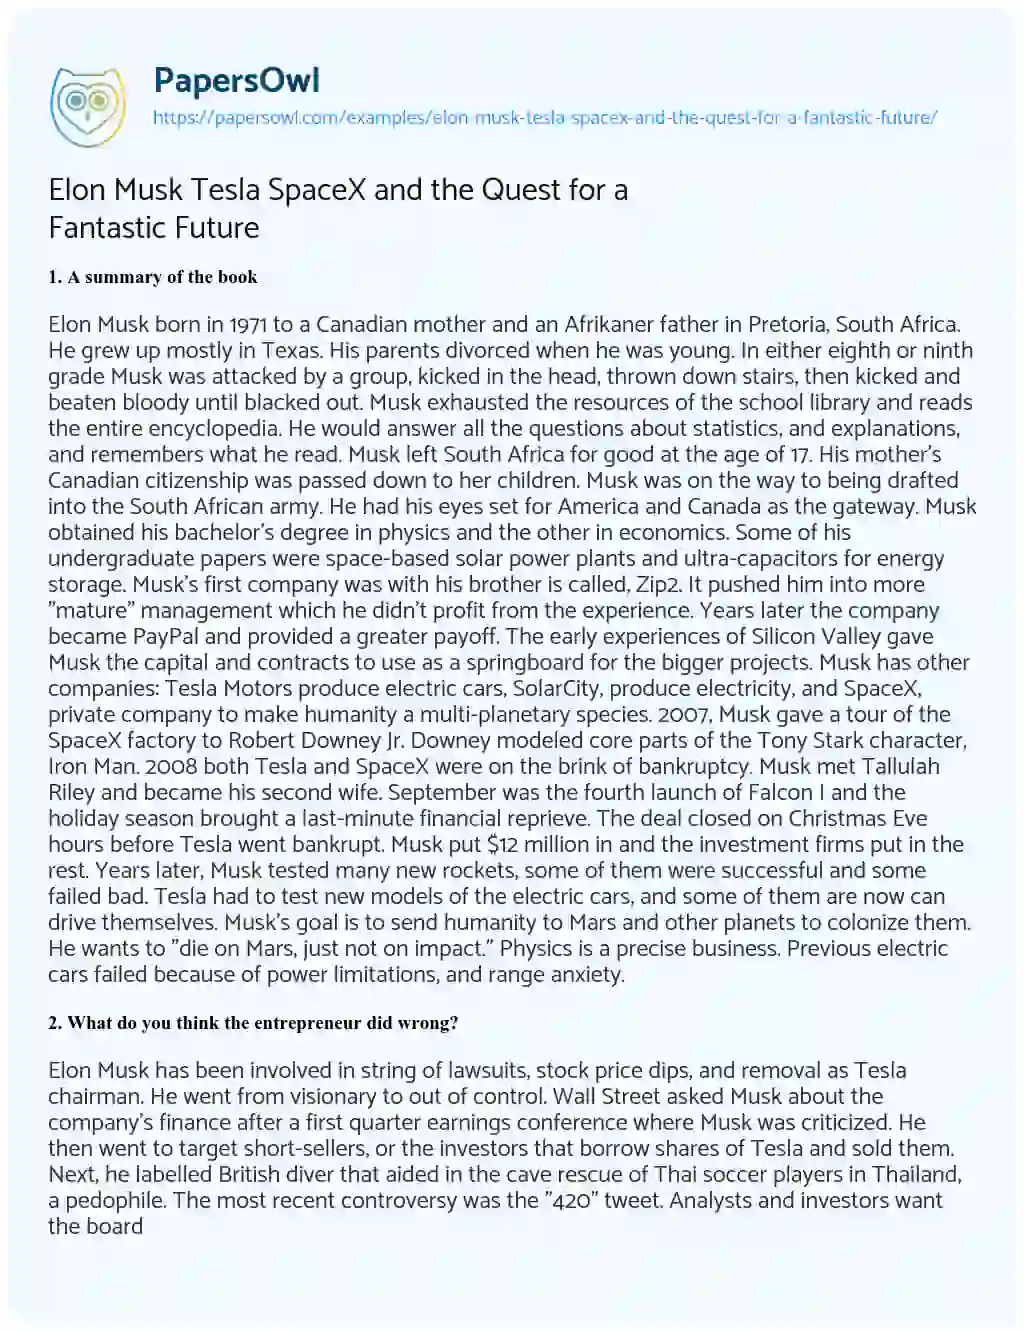 Essay on Elon Musk Tesla SpaceX and the Quest for a Fantastic Future